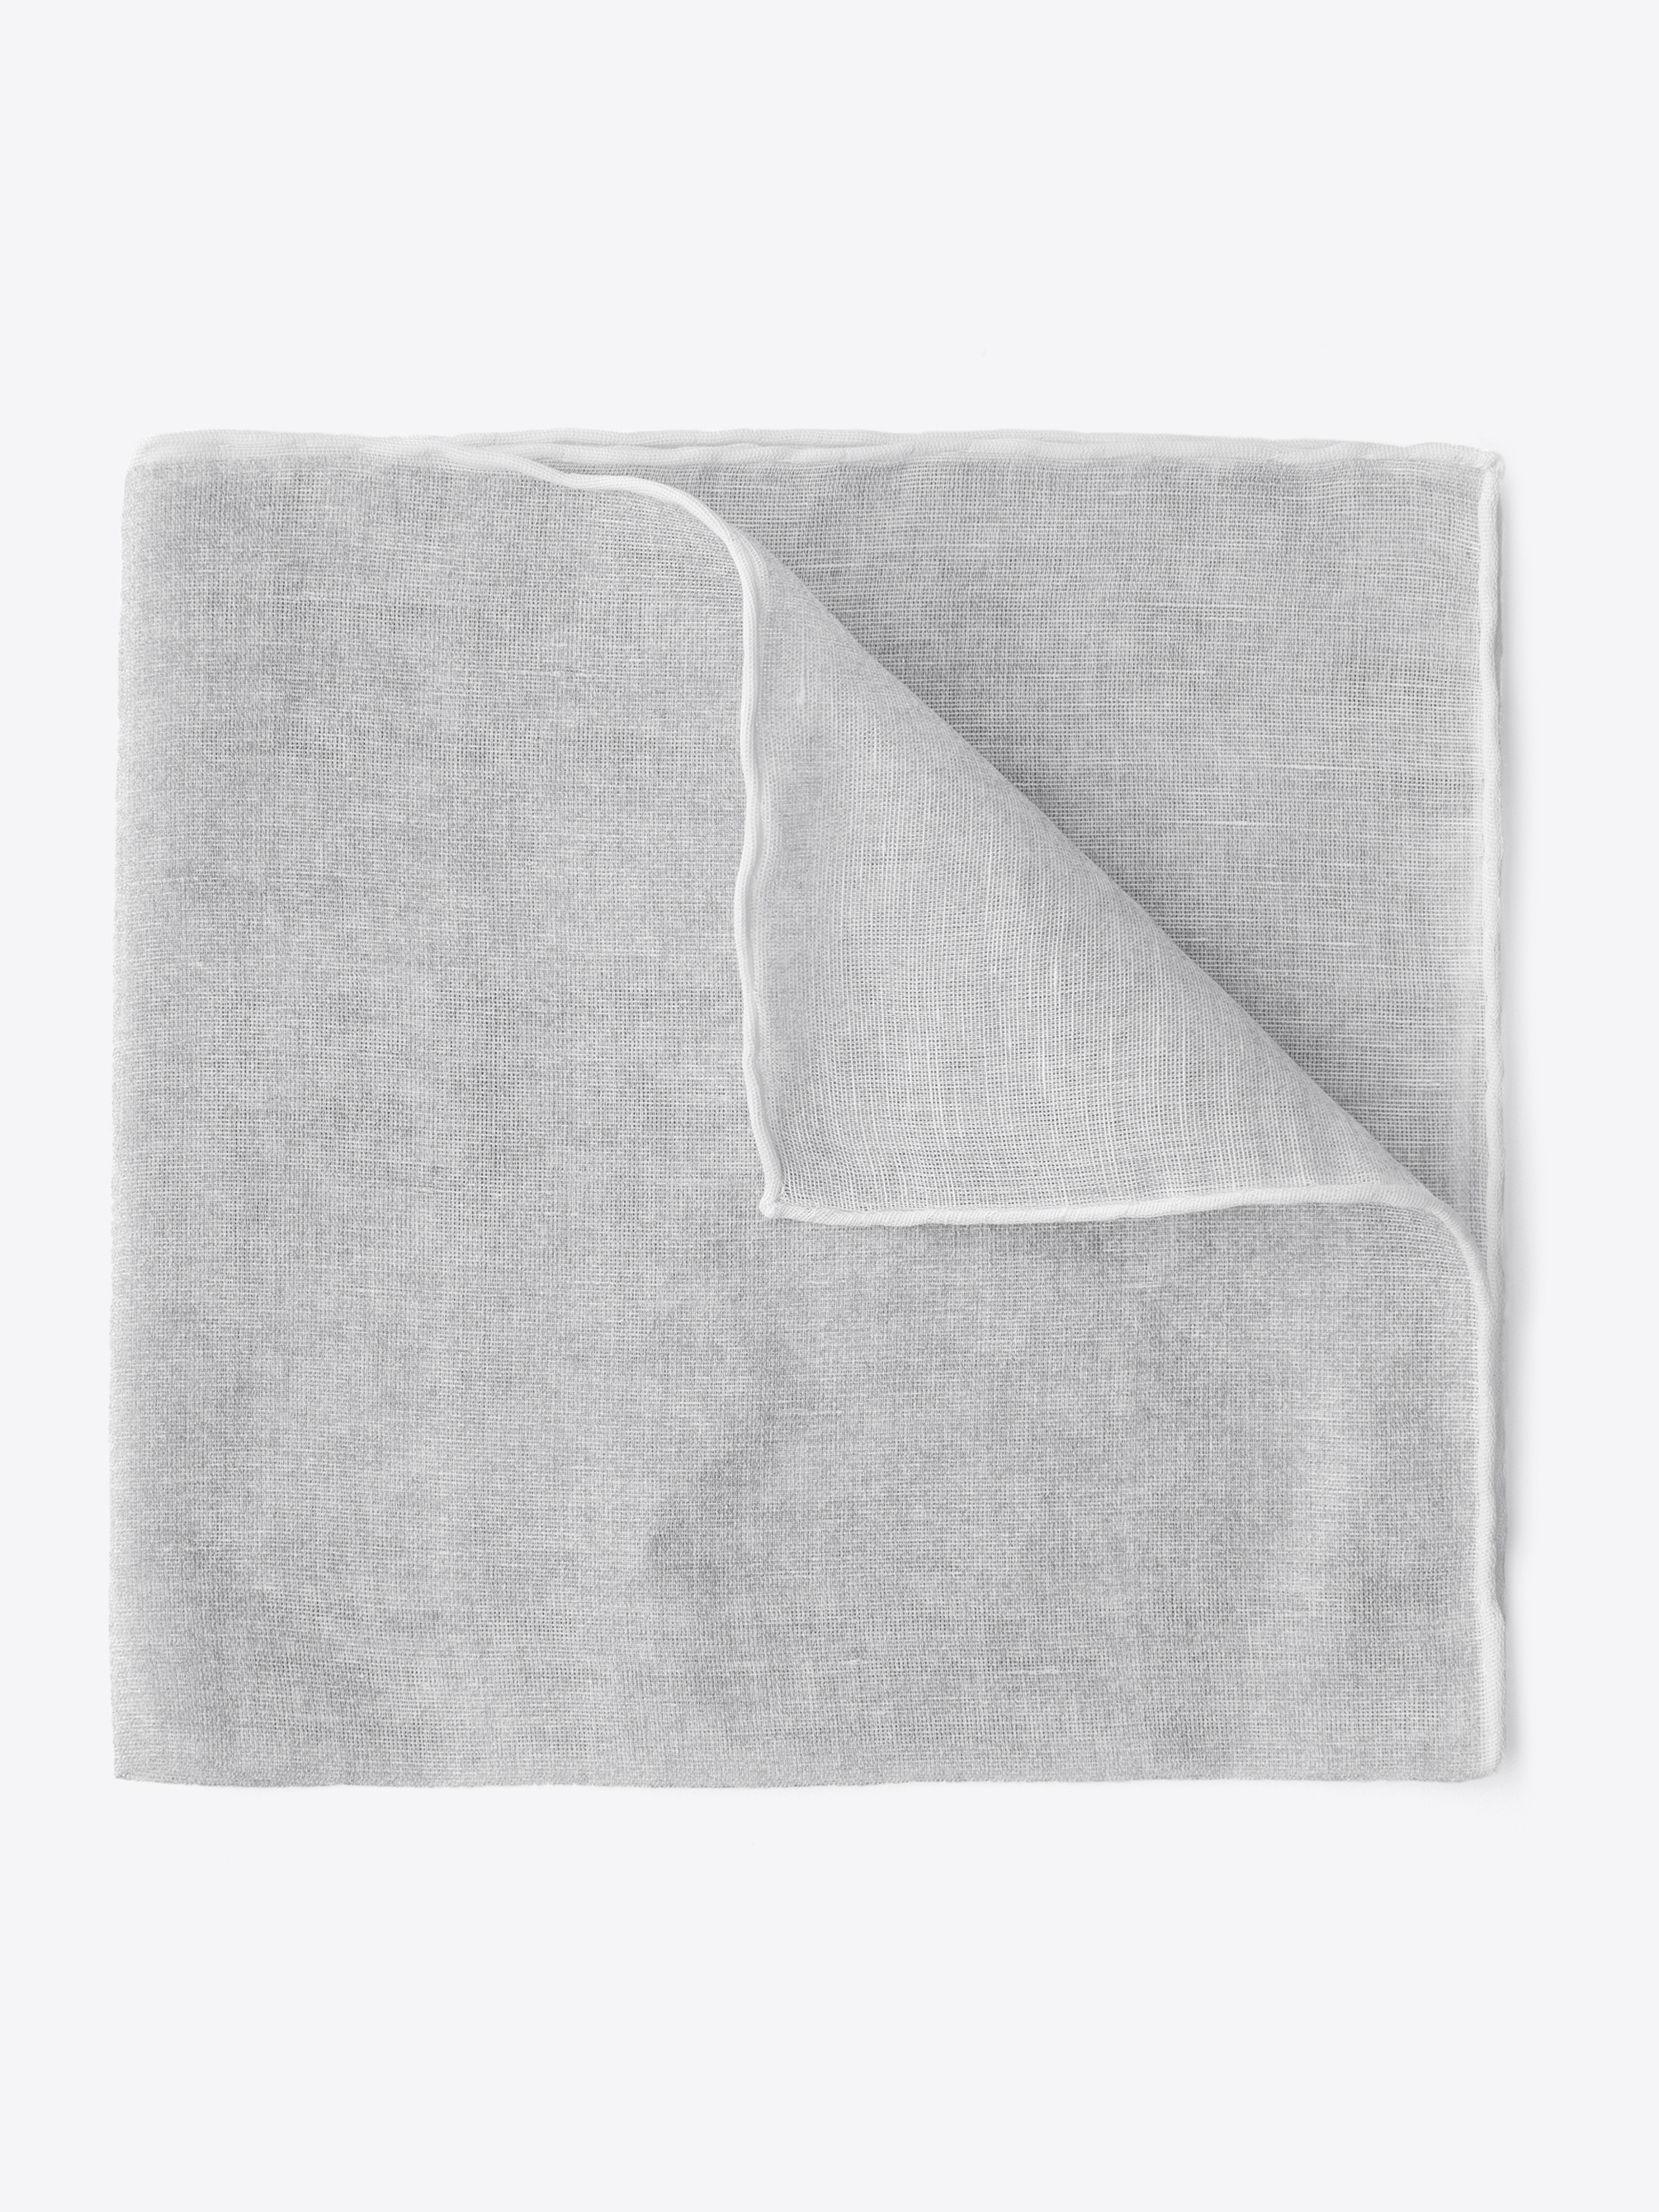 Zoom Image of White Tipped Light Grey Cotton and Linen Pocket Square